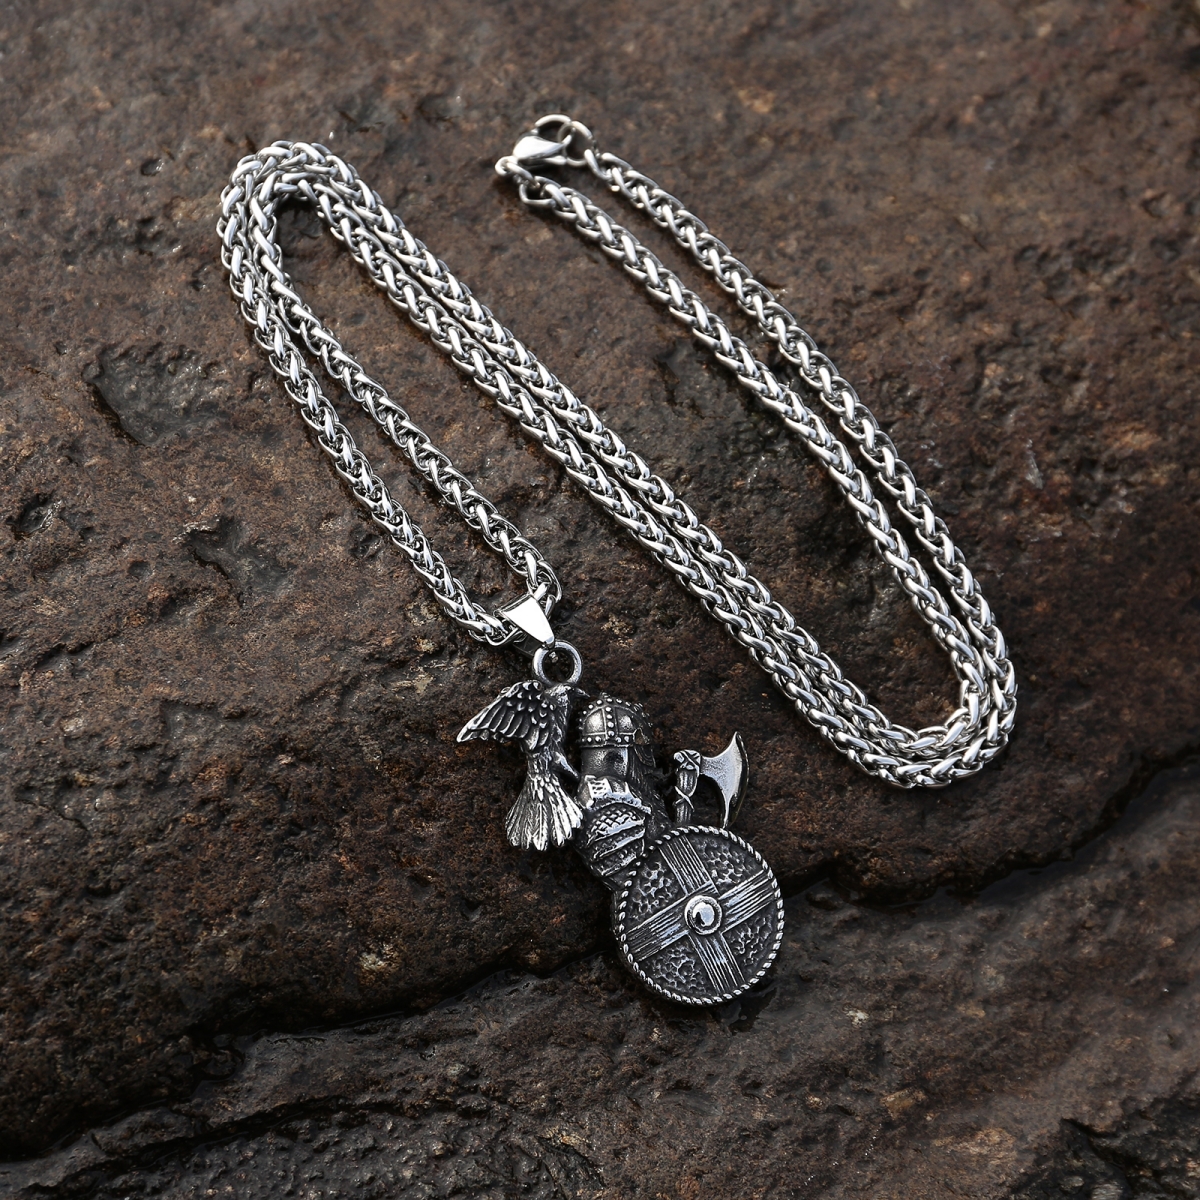 Viking Soilder Necklace US$3.8/PC-NORSECOLLECTION- Viking Jewelry,Viking Necklace,Viking Bracelet,Viking Rings,Viking Mugs,Viking Accessories,Viking Crafts